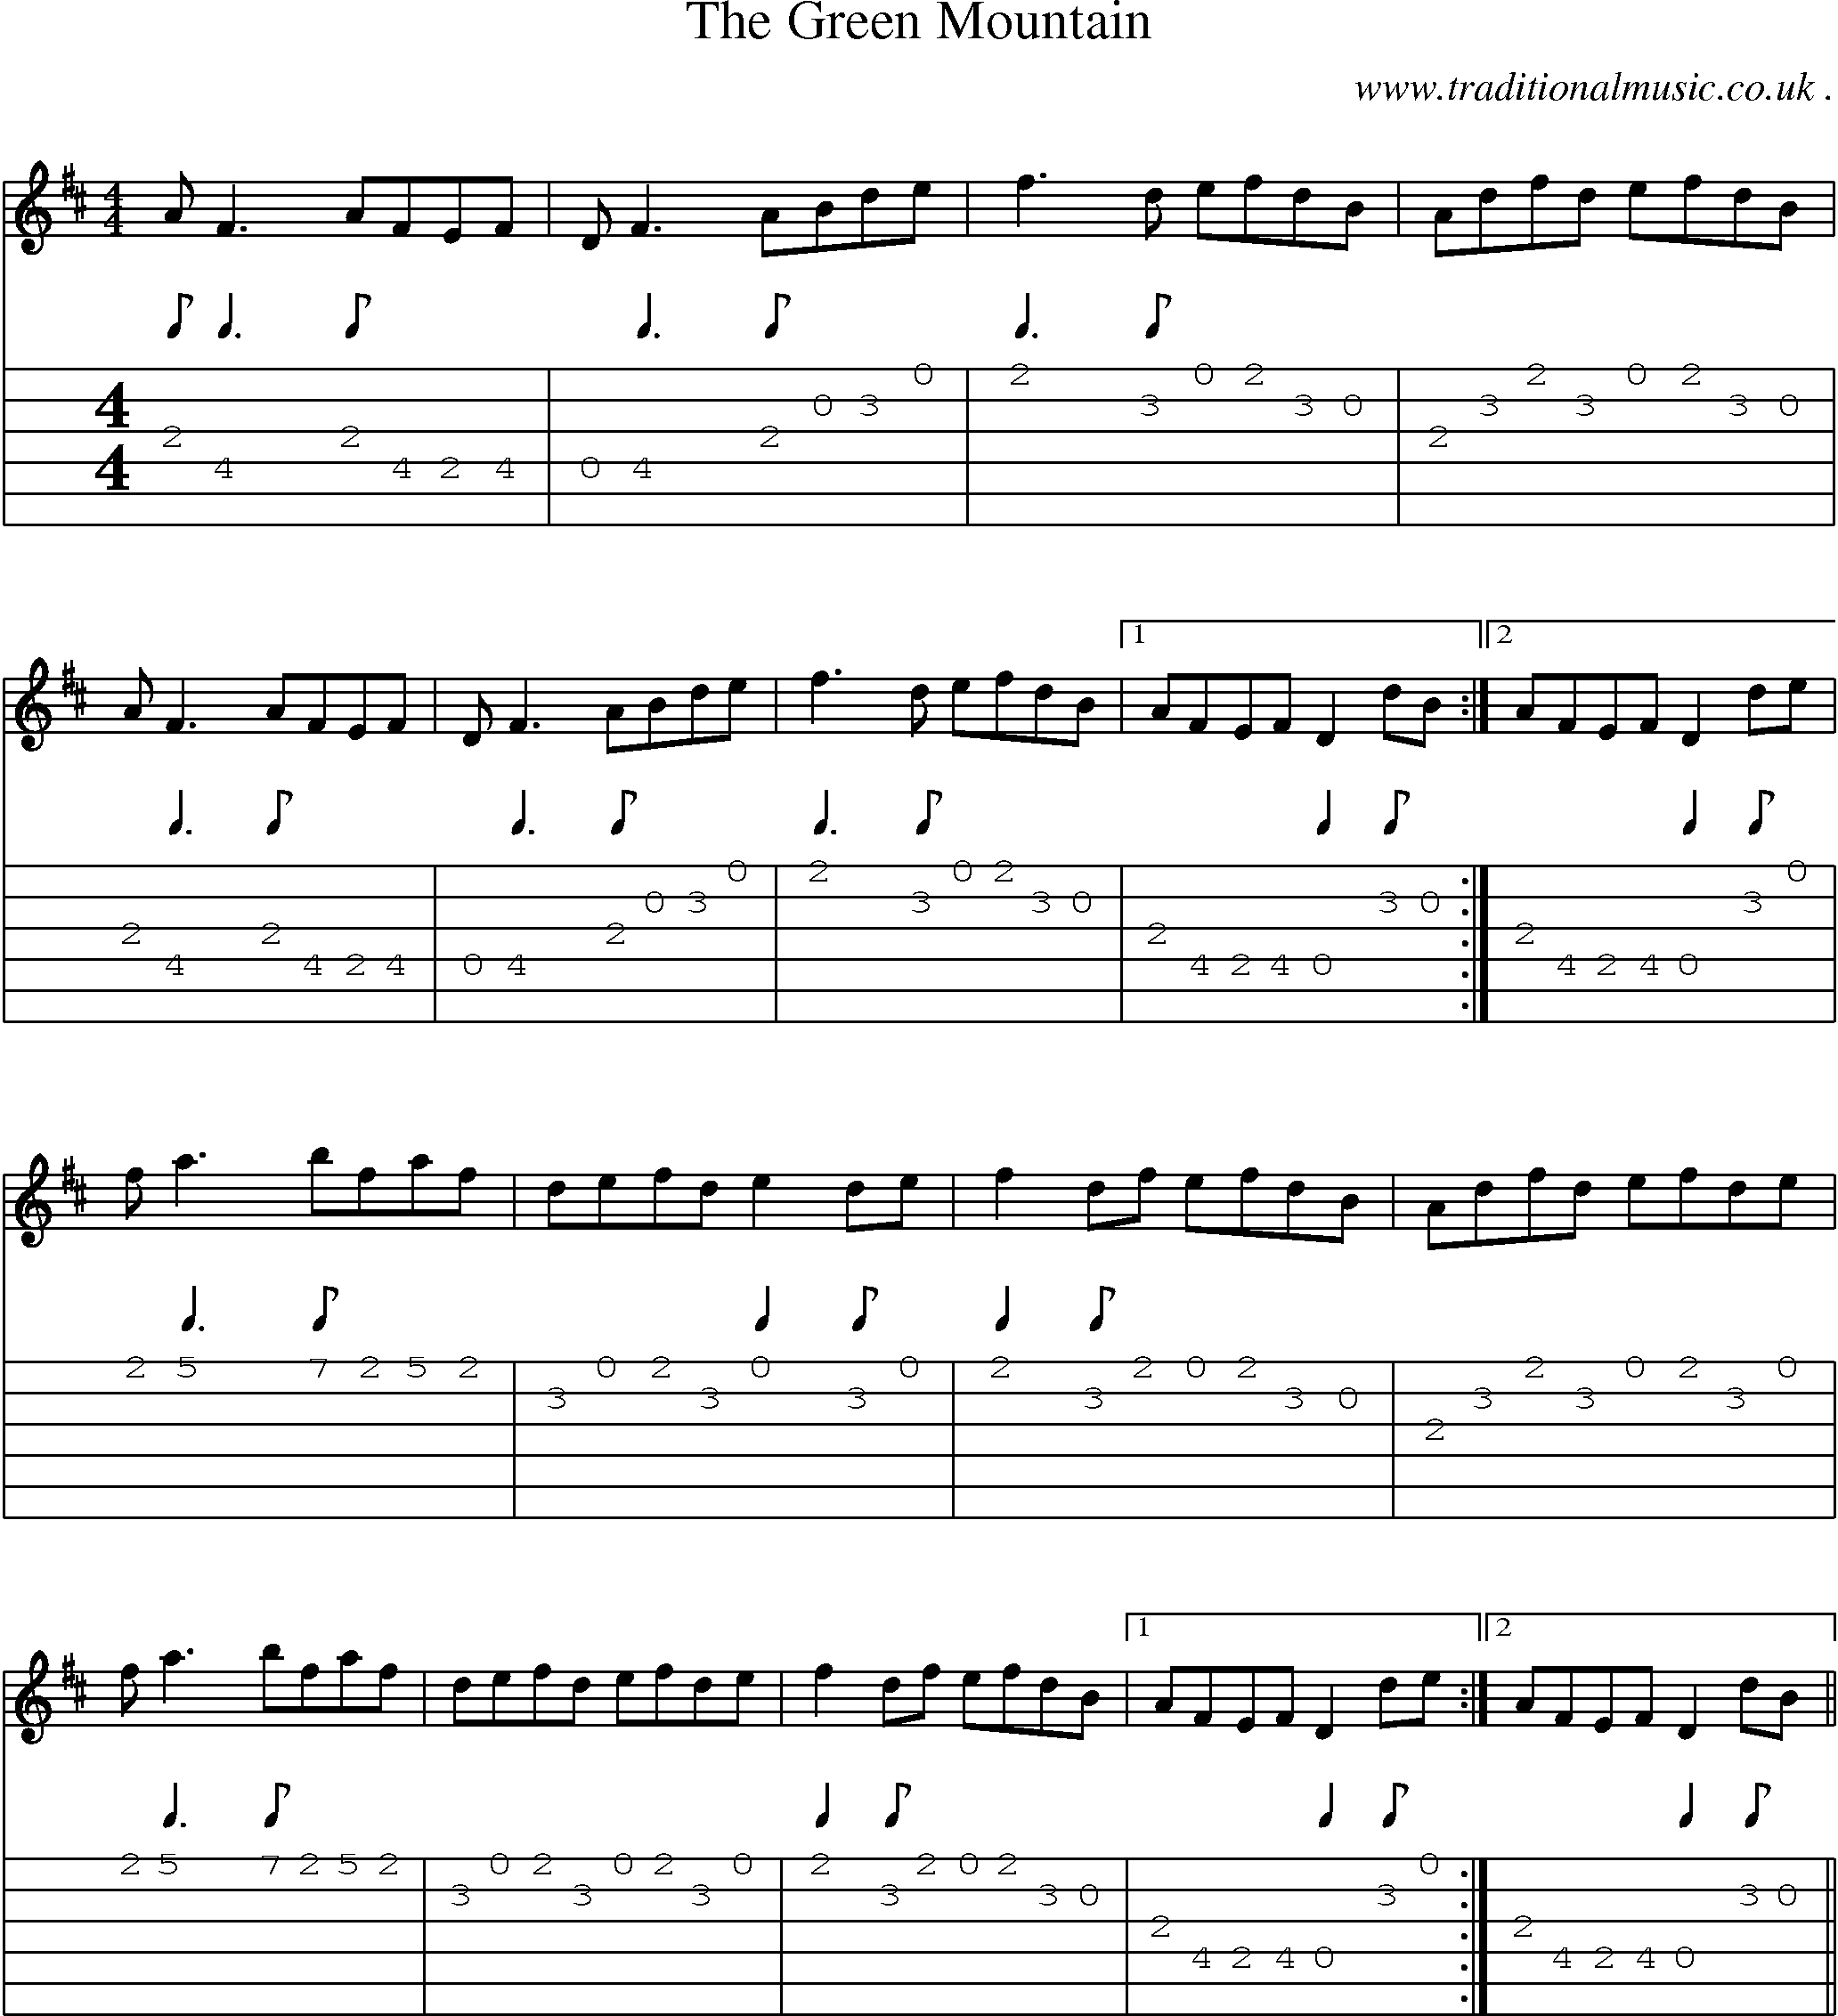 Sheet-Music and Guitar Tabs for The Green Mountain